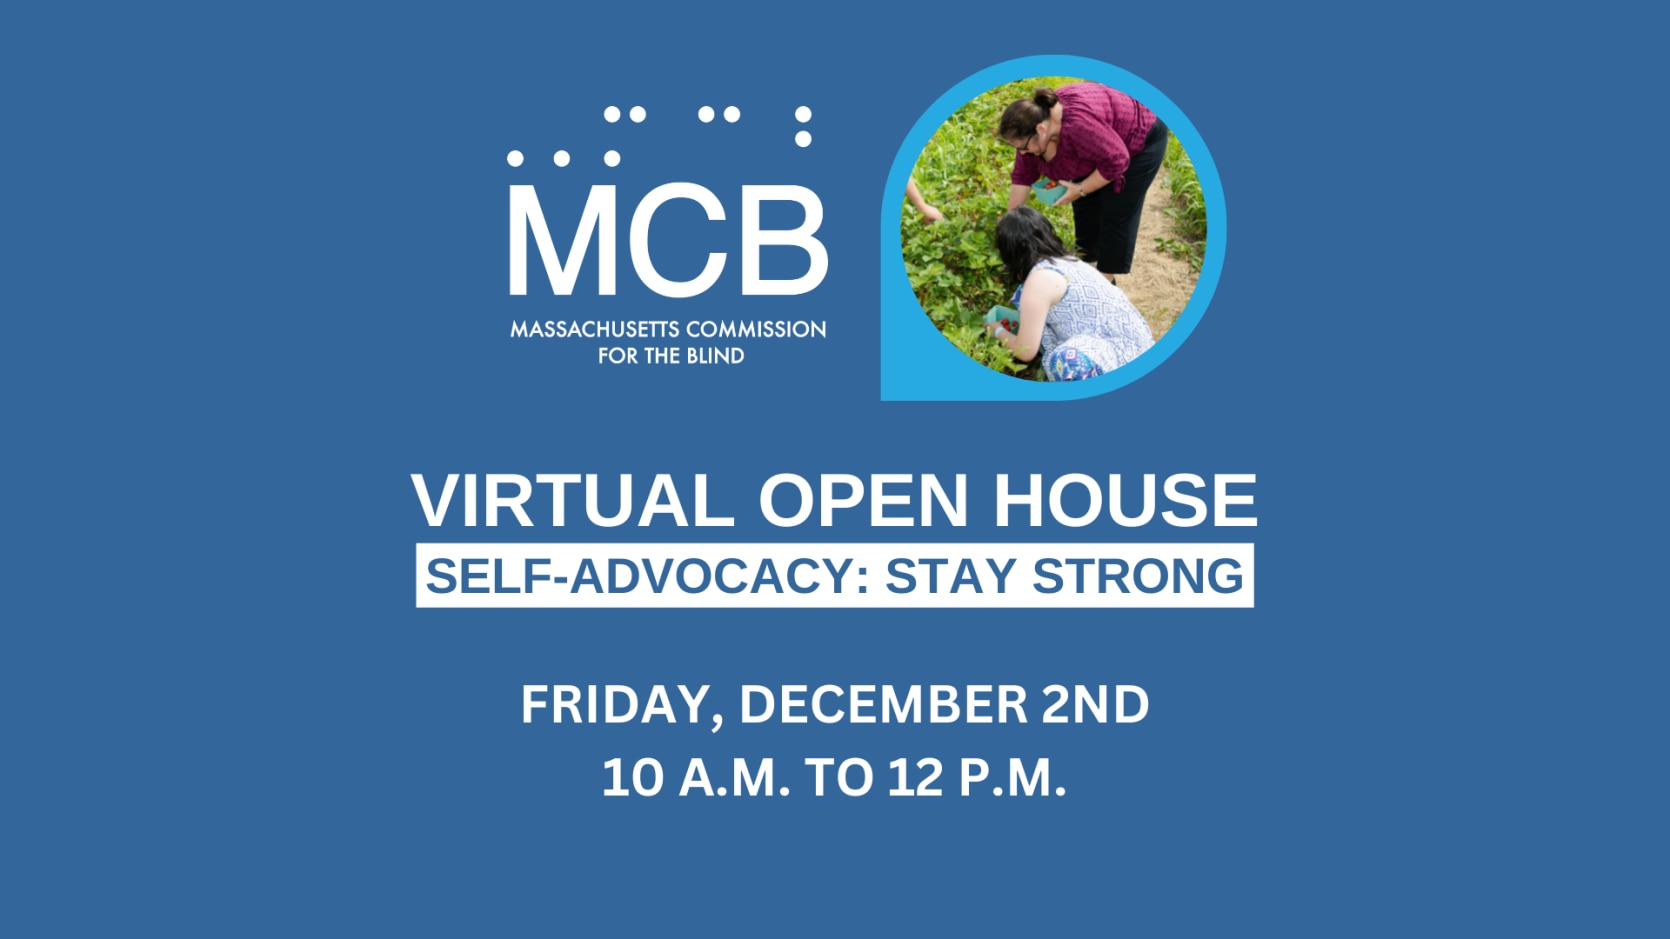 Virtual Open House Self-Advocacy: Stay Strong Friday, December 2, 2022 10 a.m. - 12 p.m. MCB logo